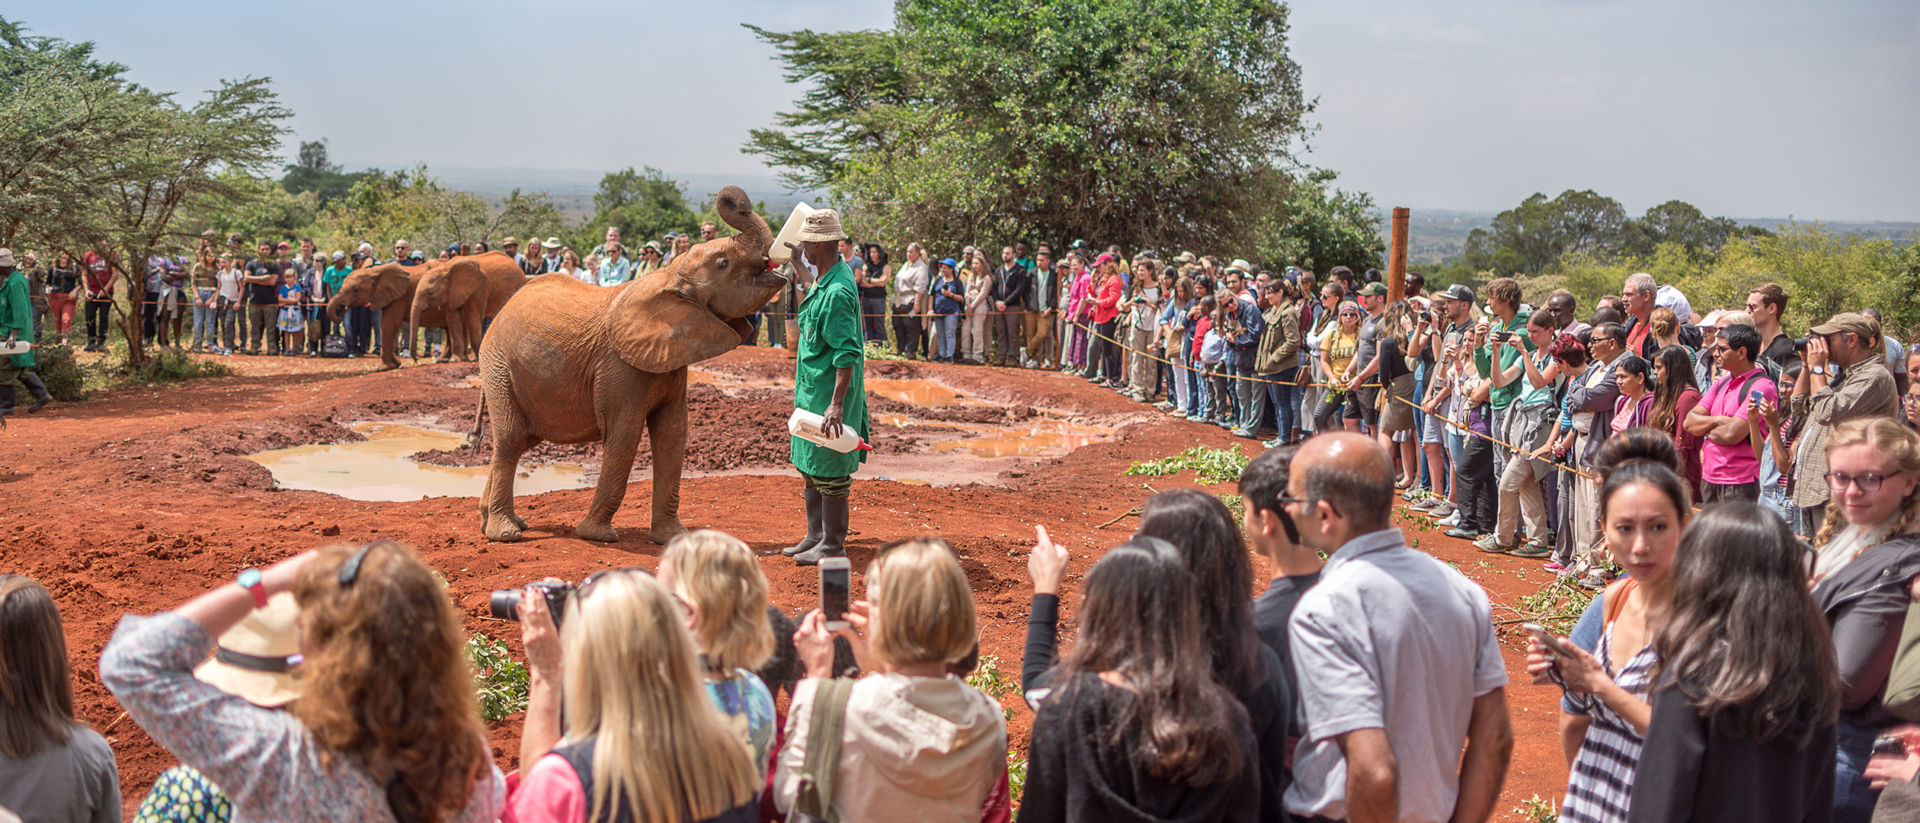 About 200 people a day visit the Sheldrick Wildlife Trust